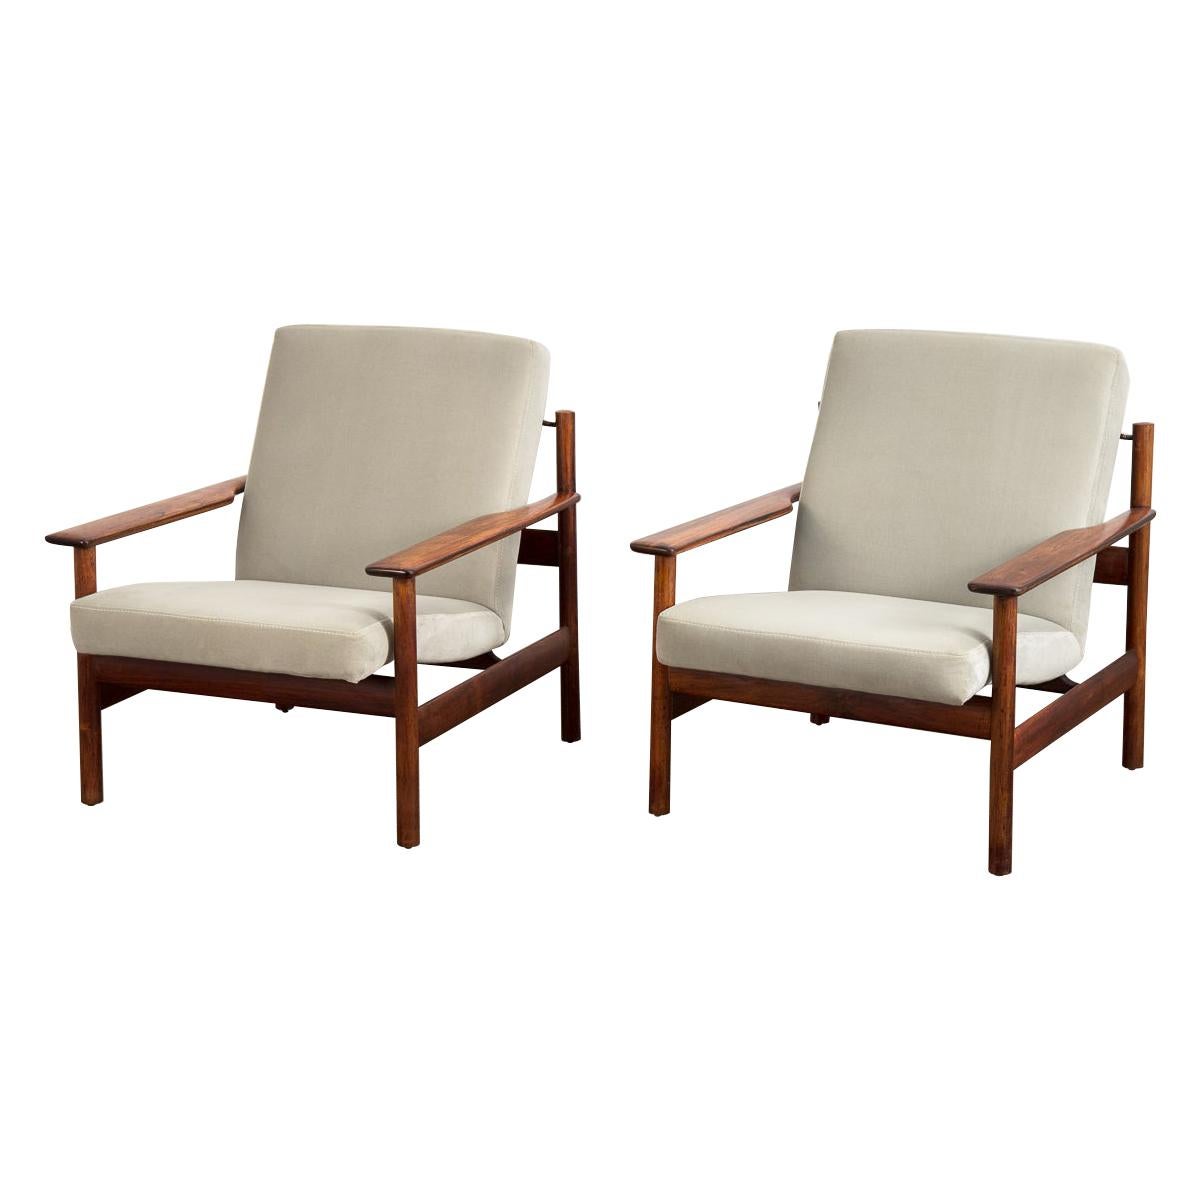 Pair of Rosewood Modern Lounge Chairs